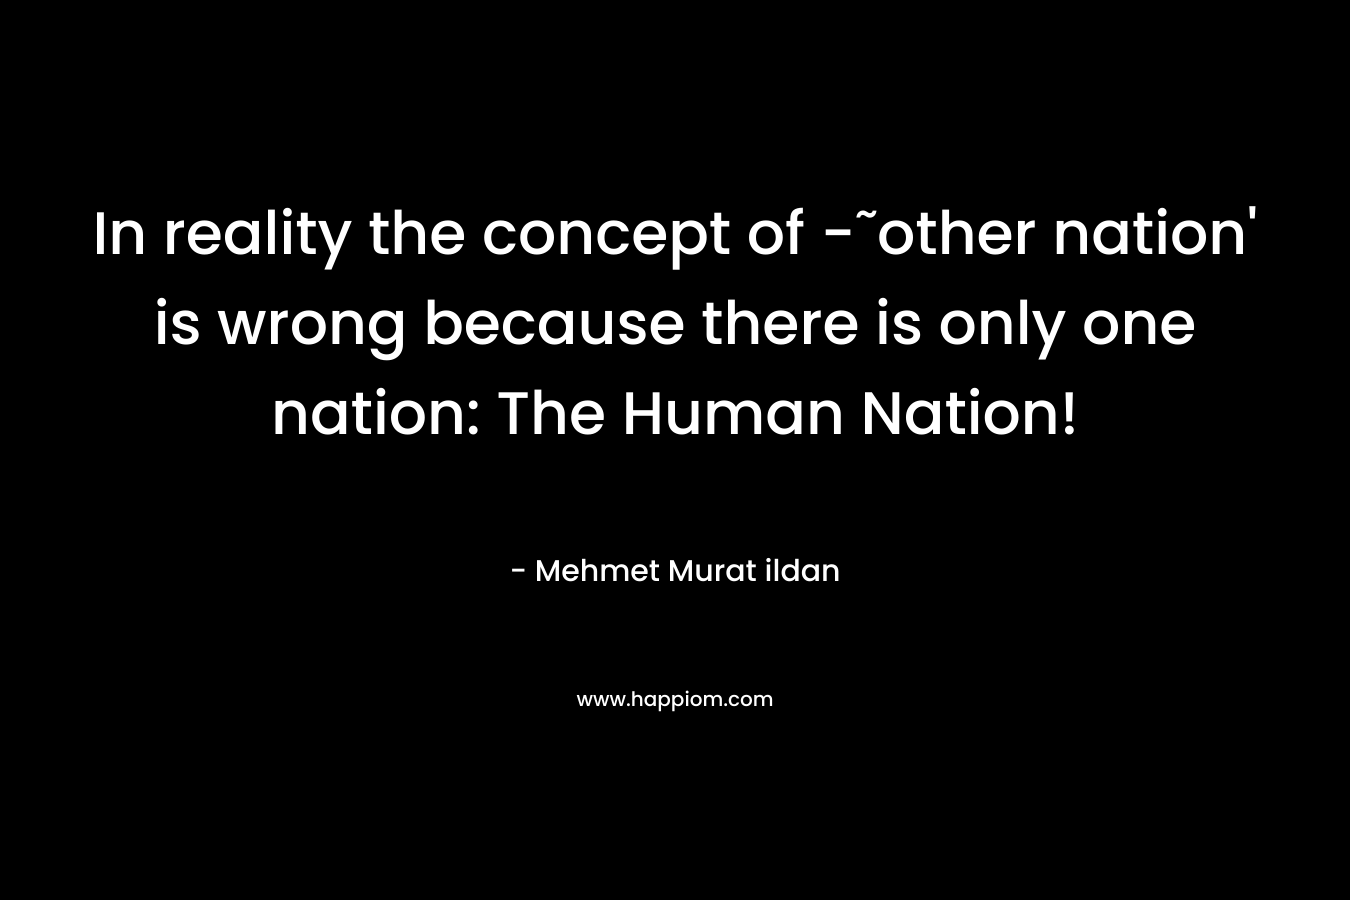 In reality the concept of -˜other nation' is wrong because there is only one nation: The Human Nation!